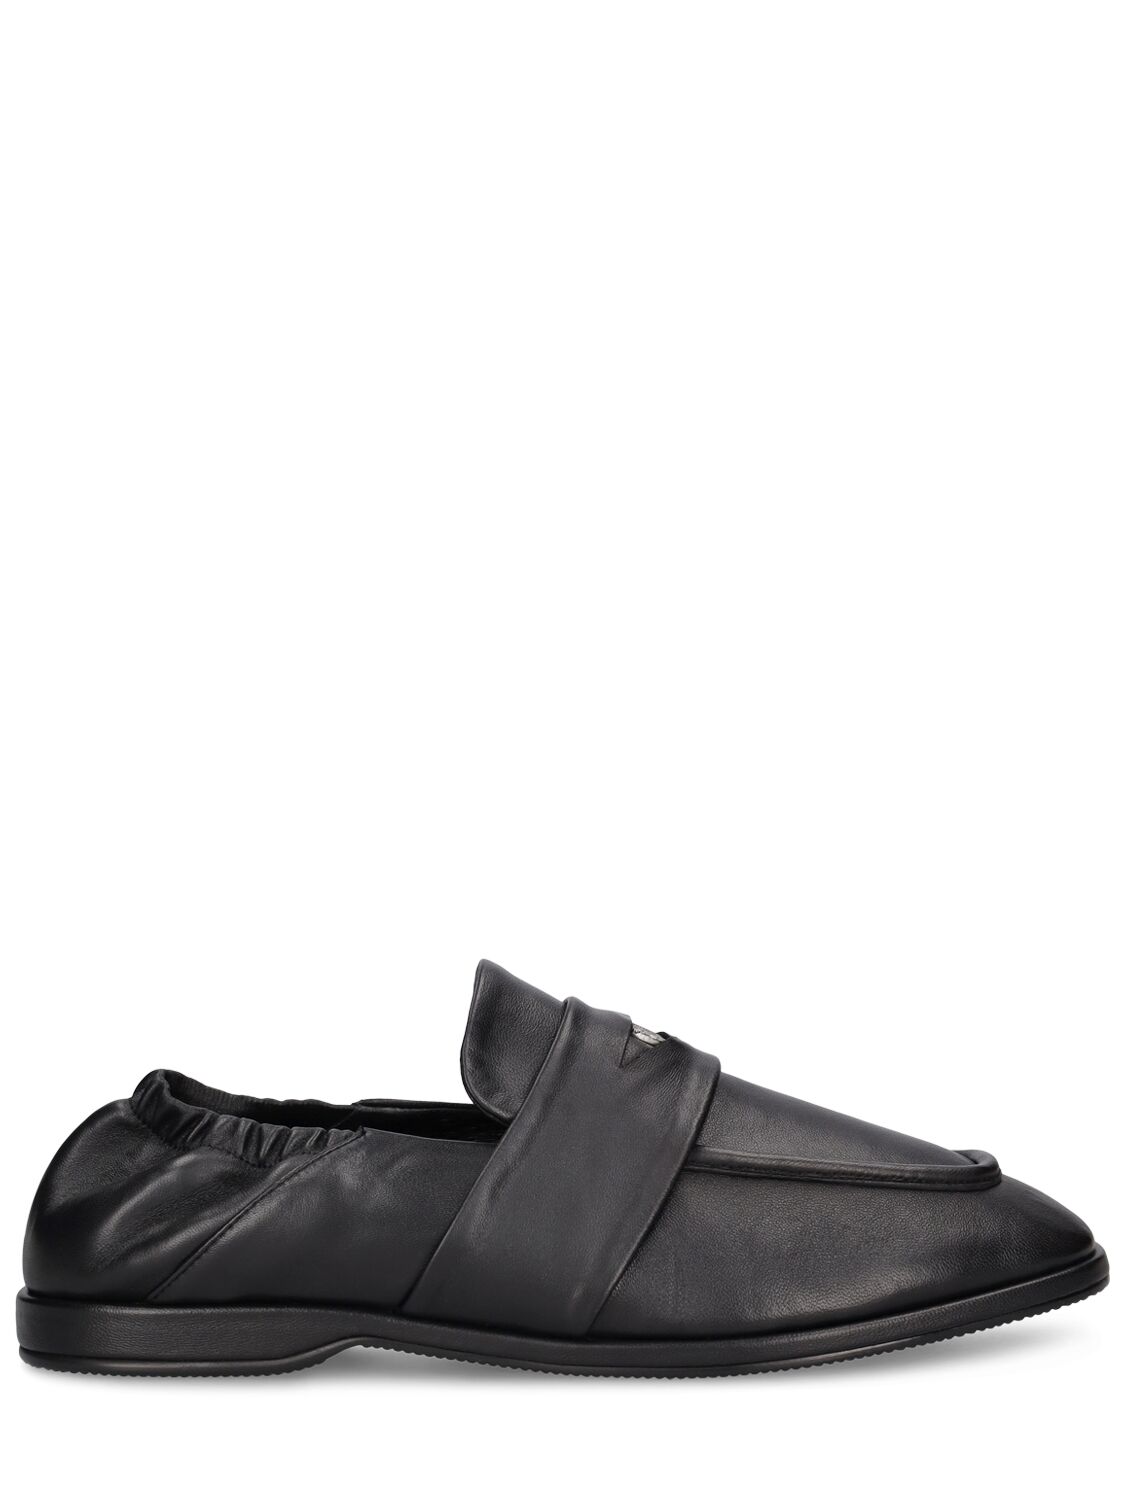 After Pray Square Penny Loafers W/ Band In Black